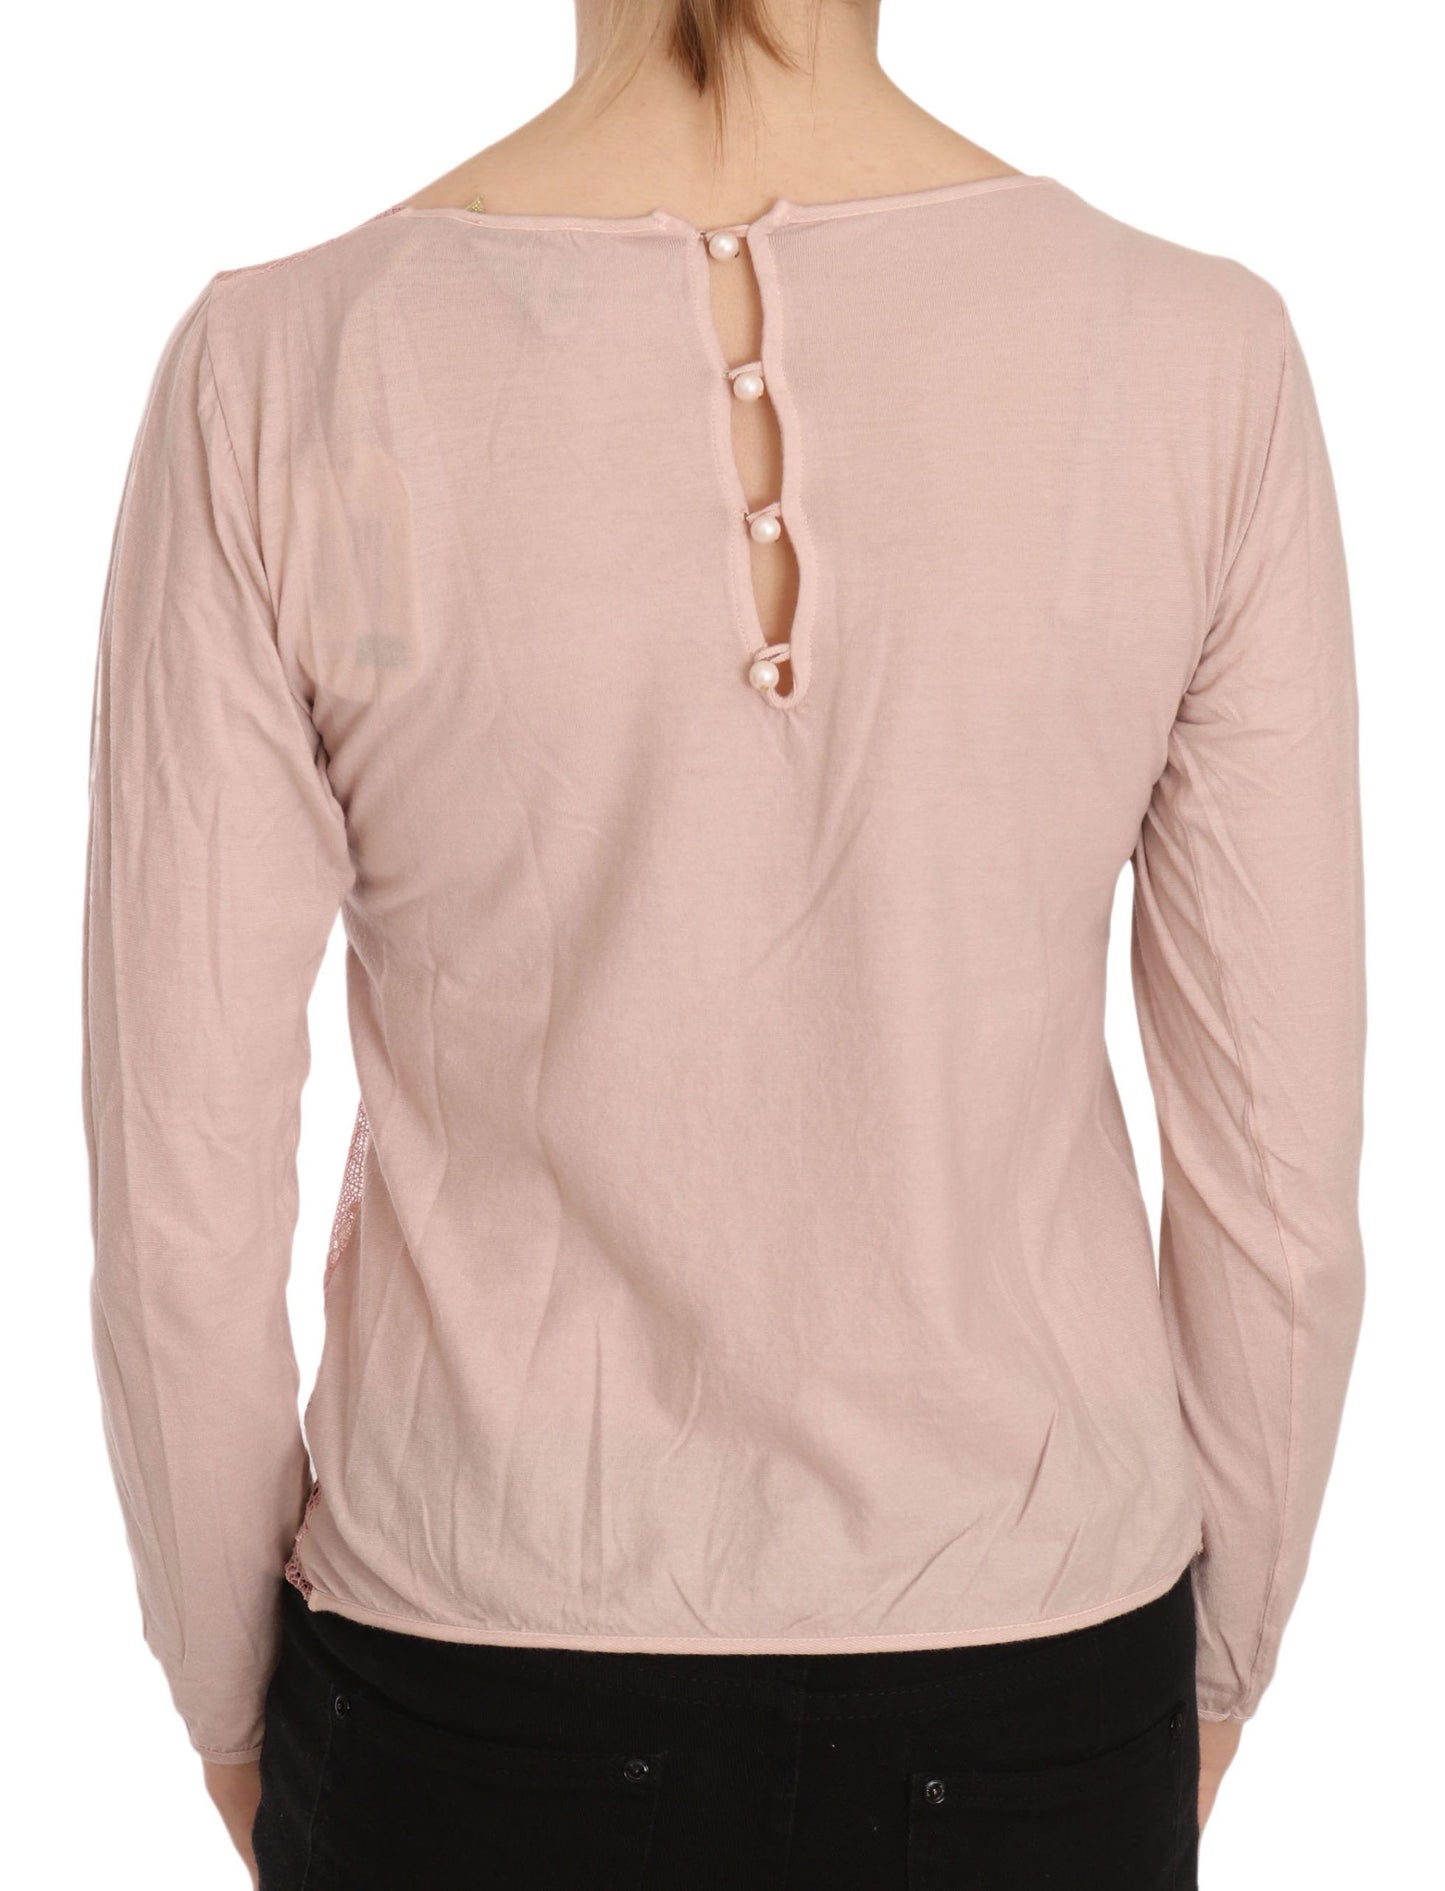 PINK MEMORIES Pink Lace See Through Long Sleeve Top Blouse